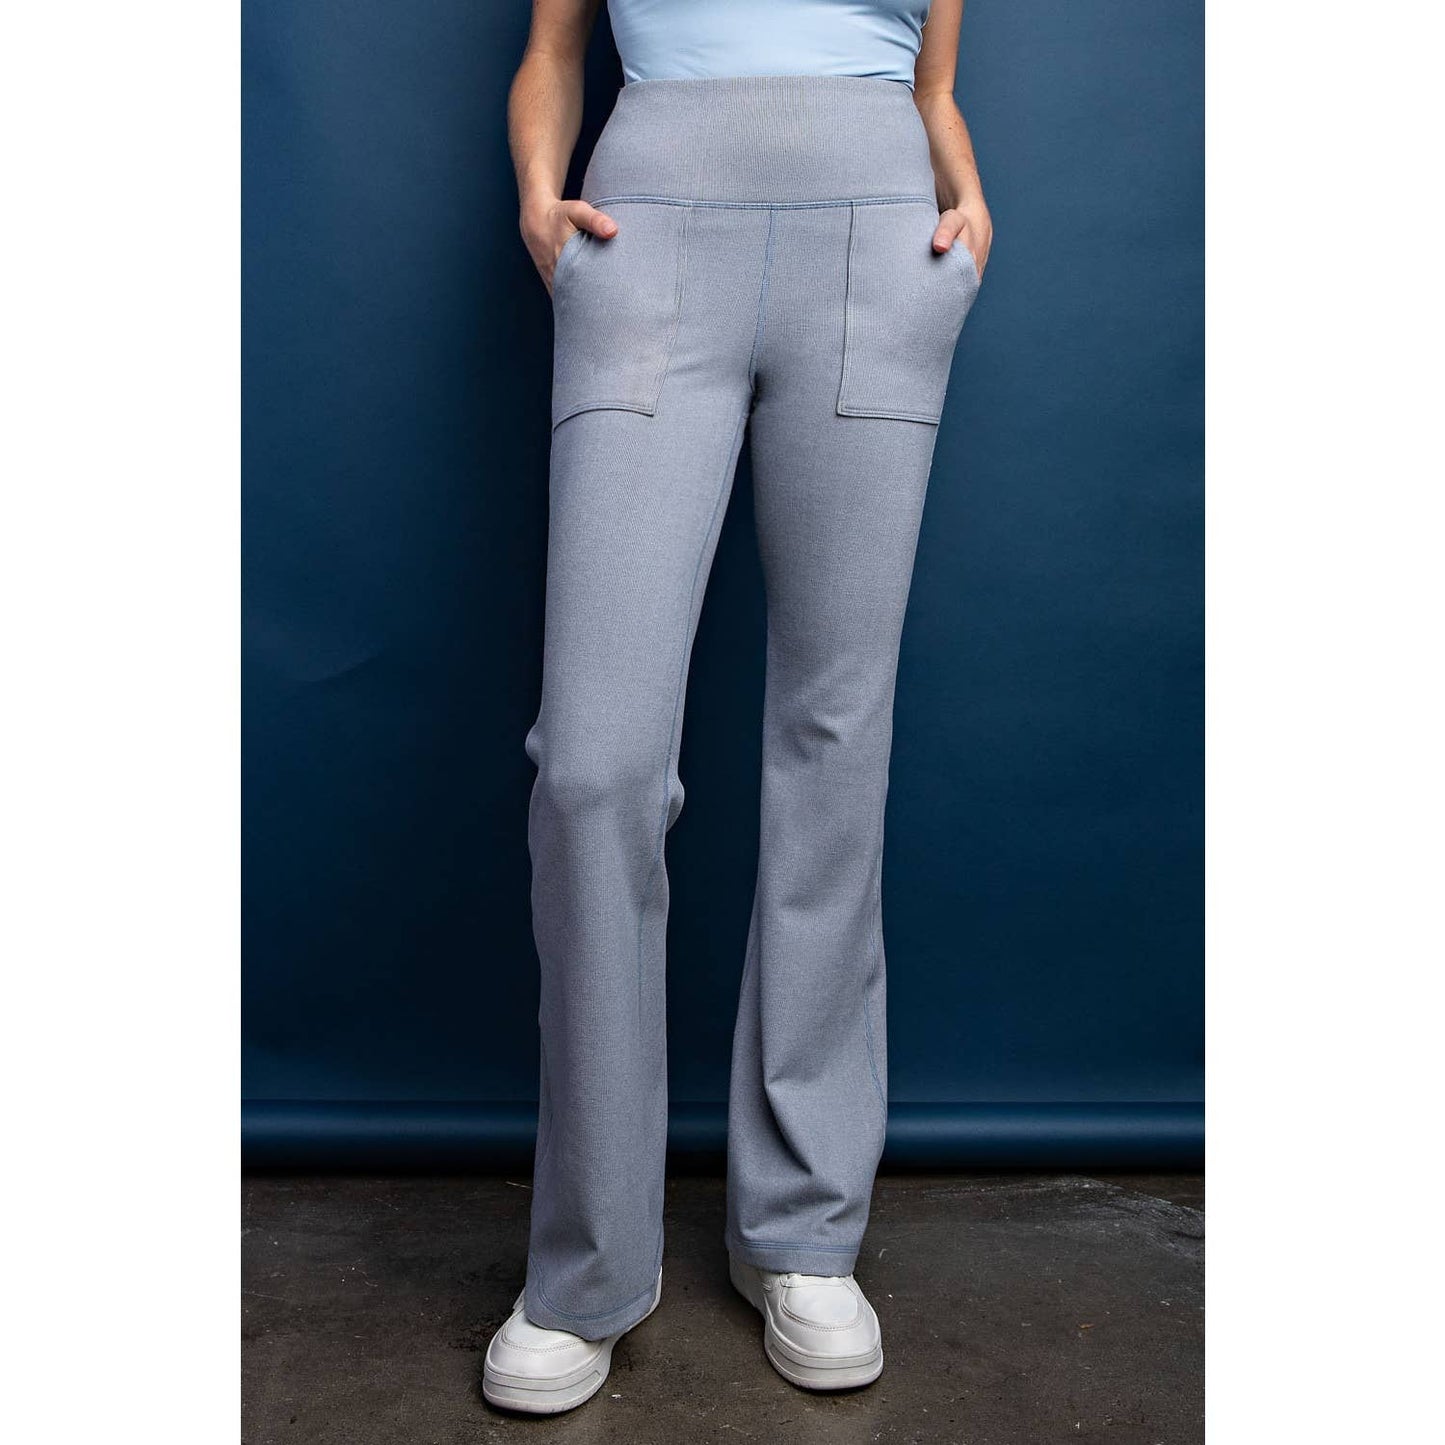 BRUSHED BELL BOTTOM PANTS WITH SIDE POCKETS